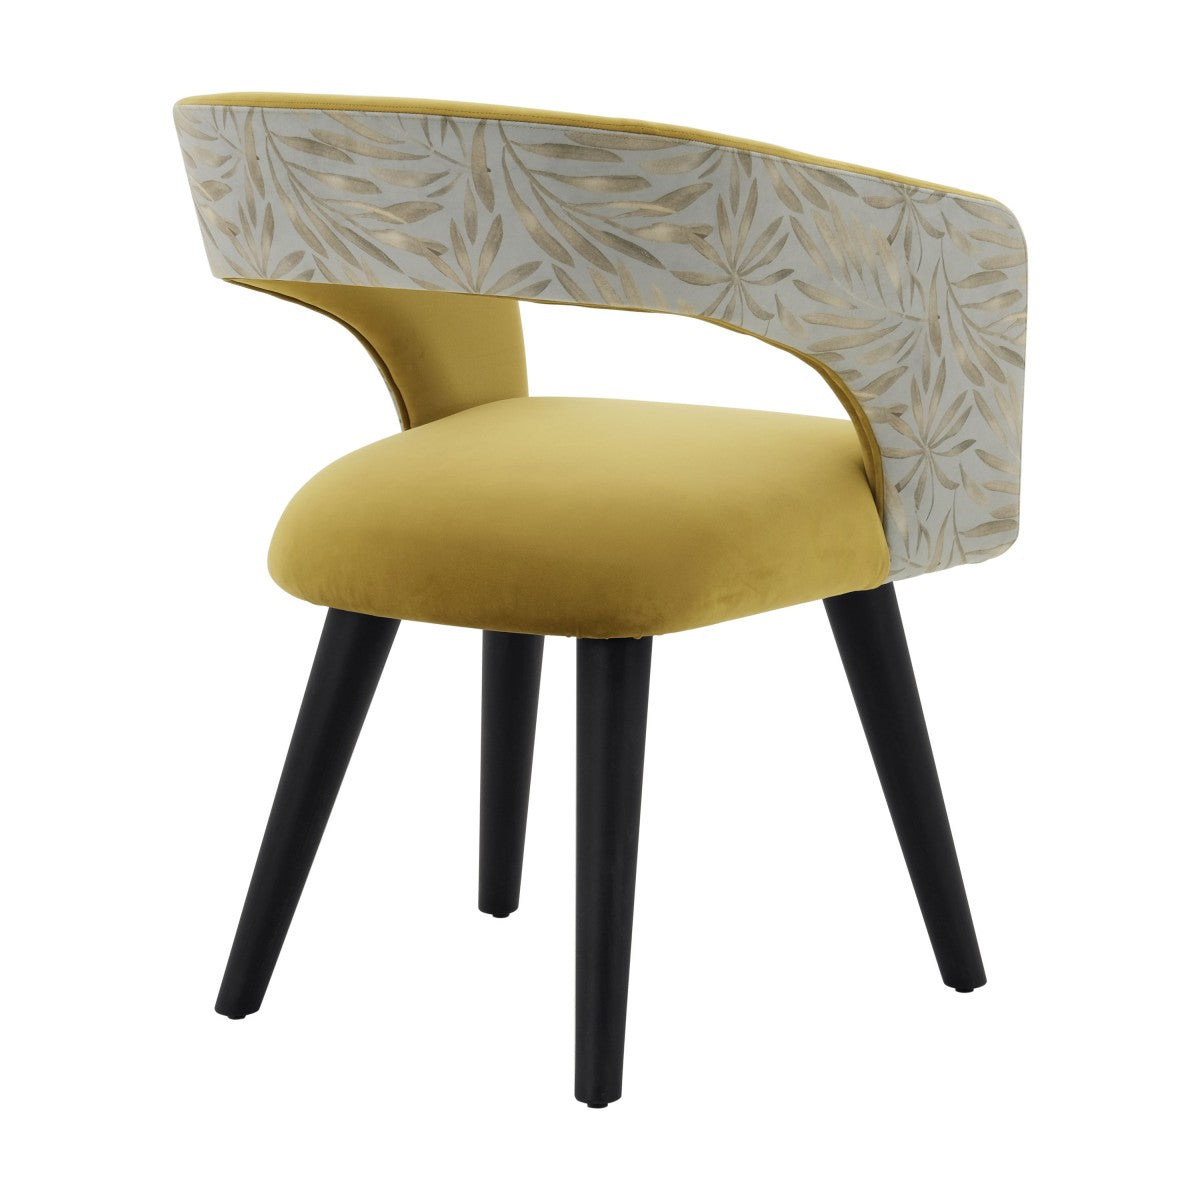 Platis Bespoke Upholstered Modern Contemporary Dining Armchair Chair MS029A Custom Made To Order